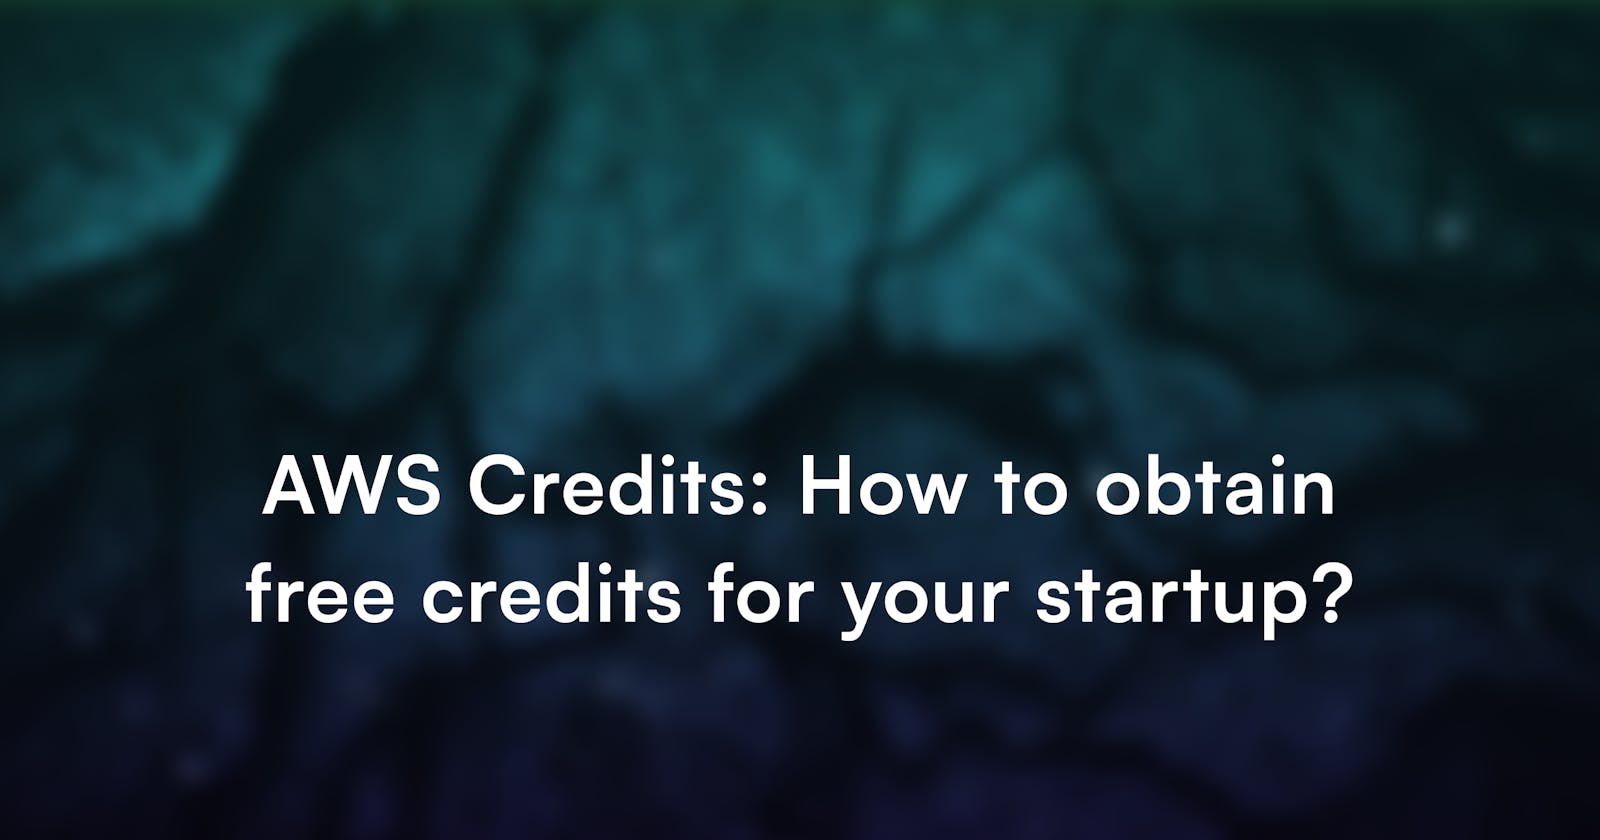 AWS Credits: How To Obtain Free Credits for Your Startup?